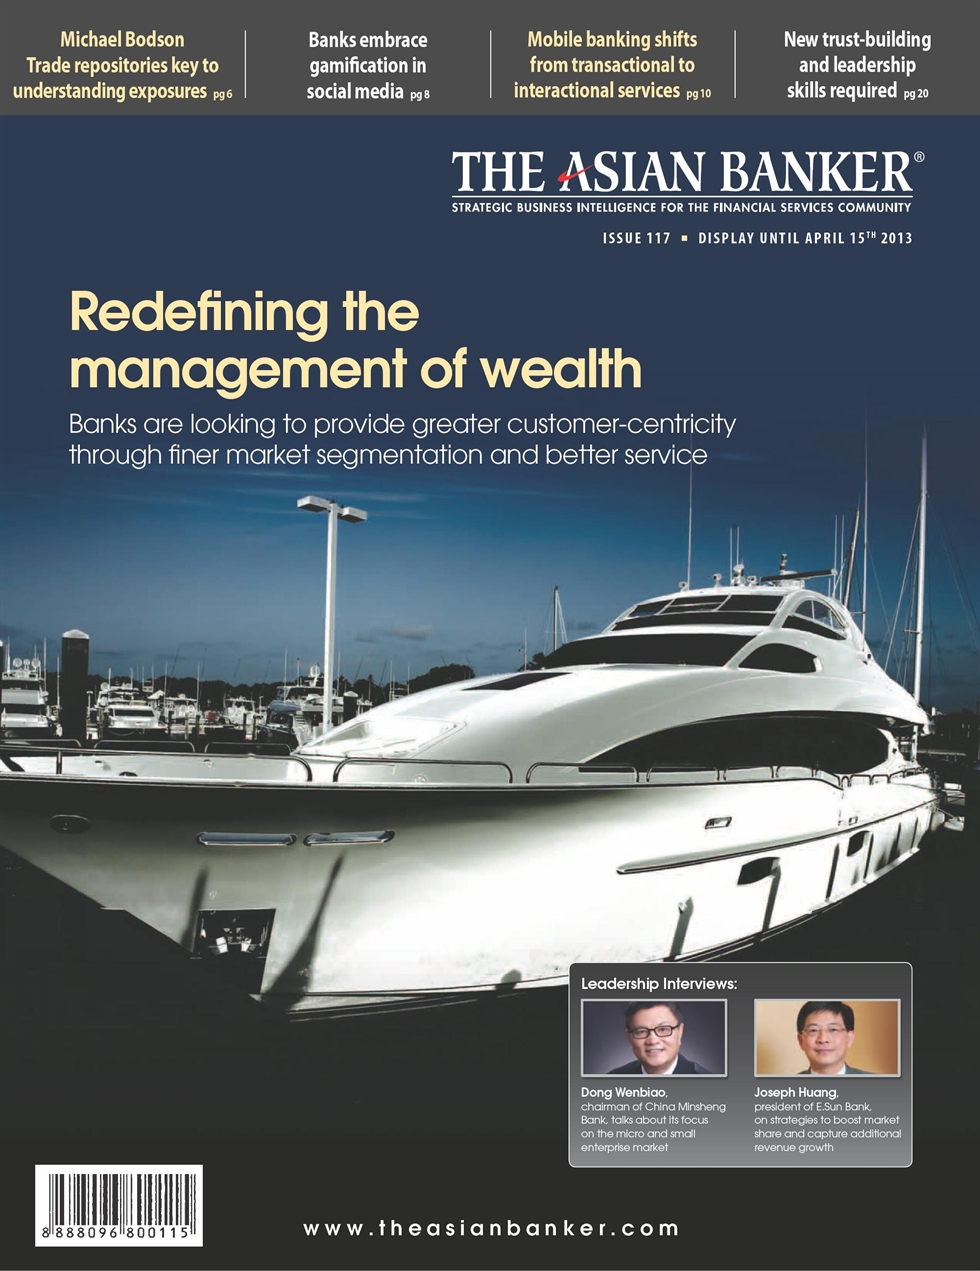 Issue 117: Redefining the management of wealth 